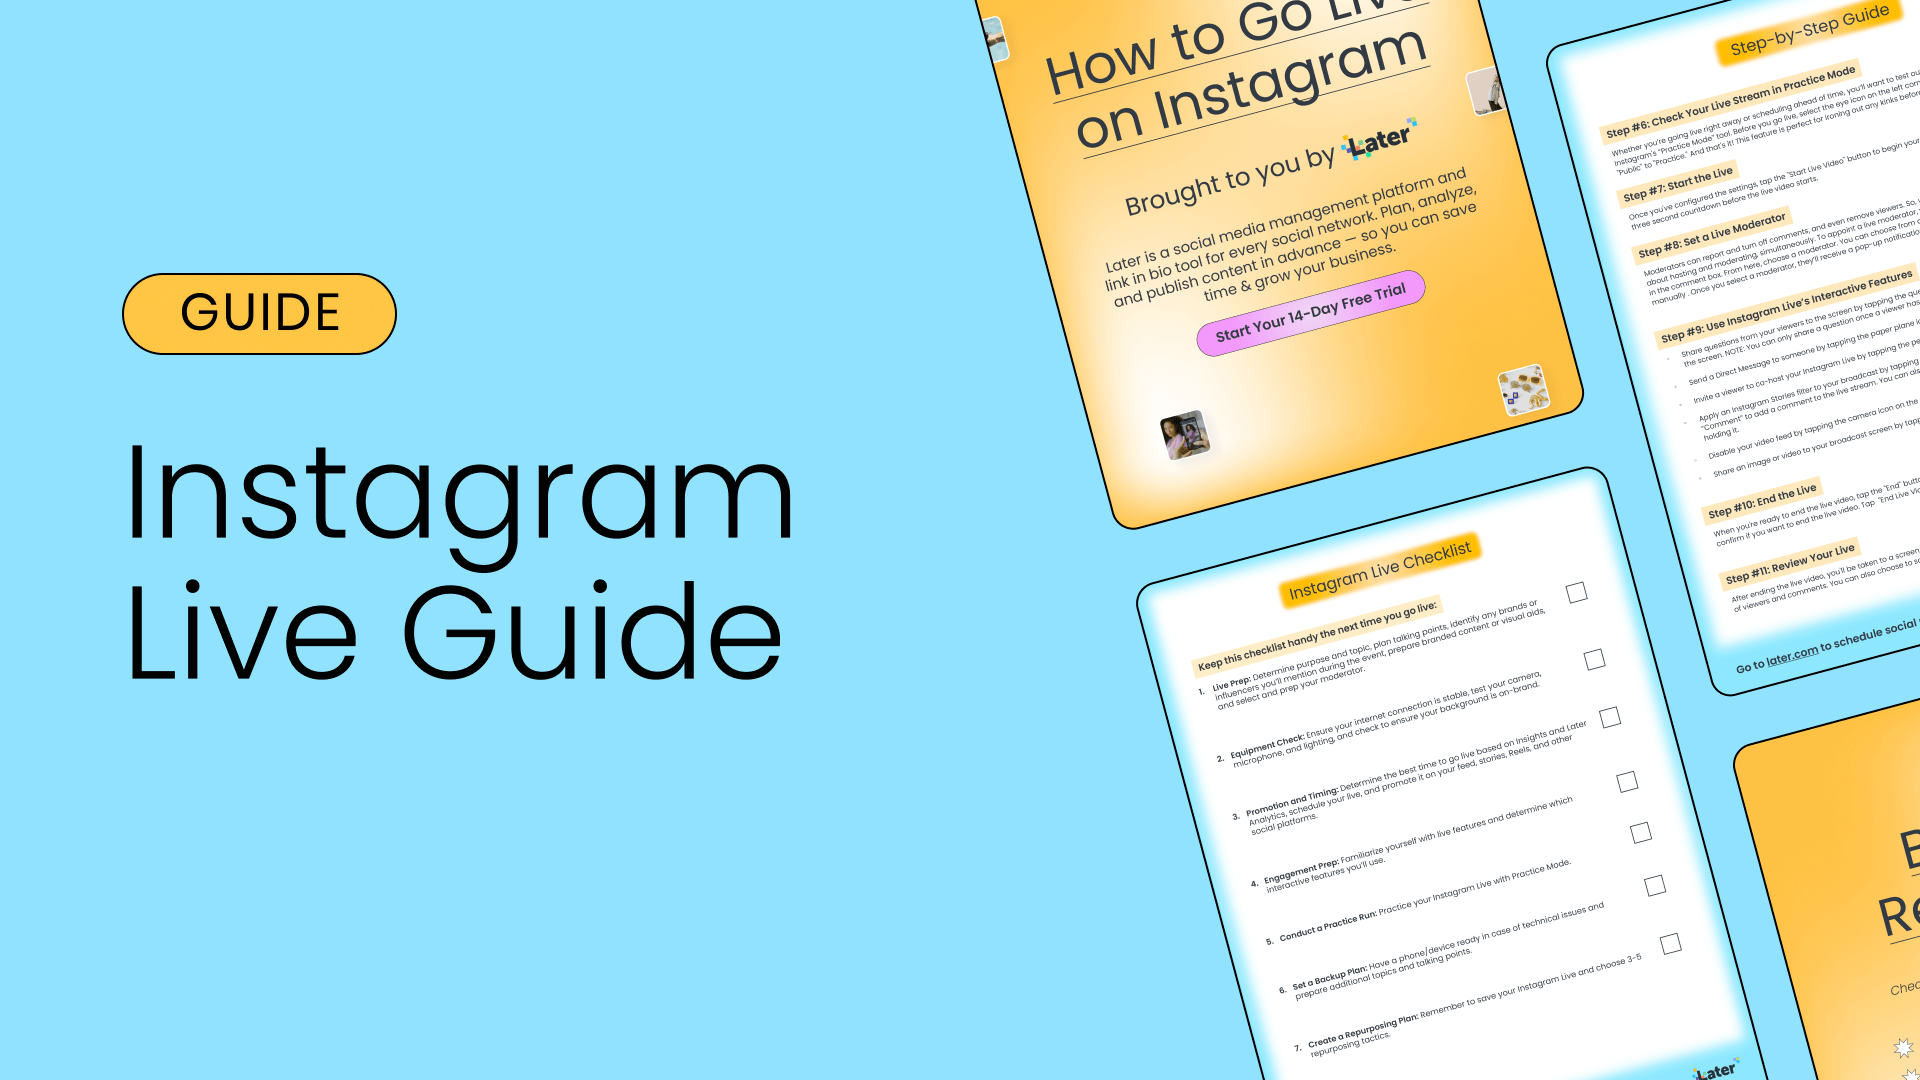 Thumbnail image showing the title “Instagram live guide” beside sample pages of the guide.